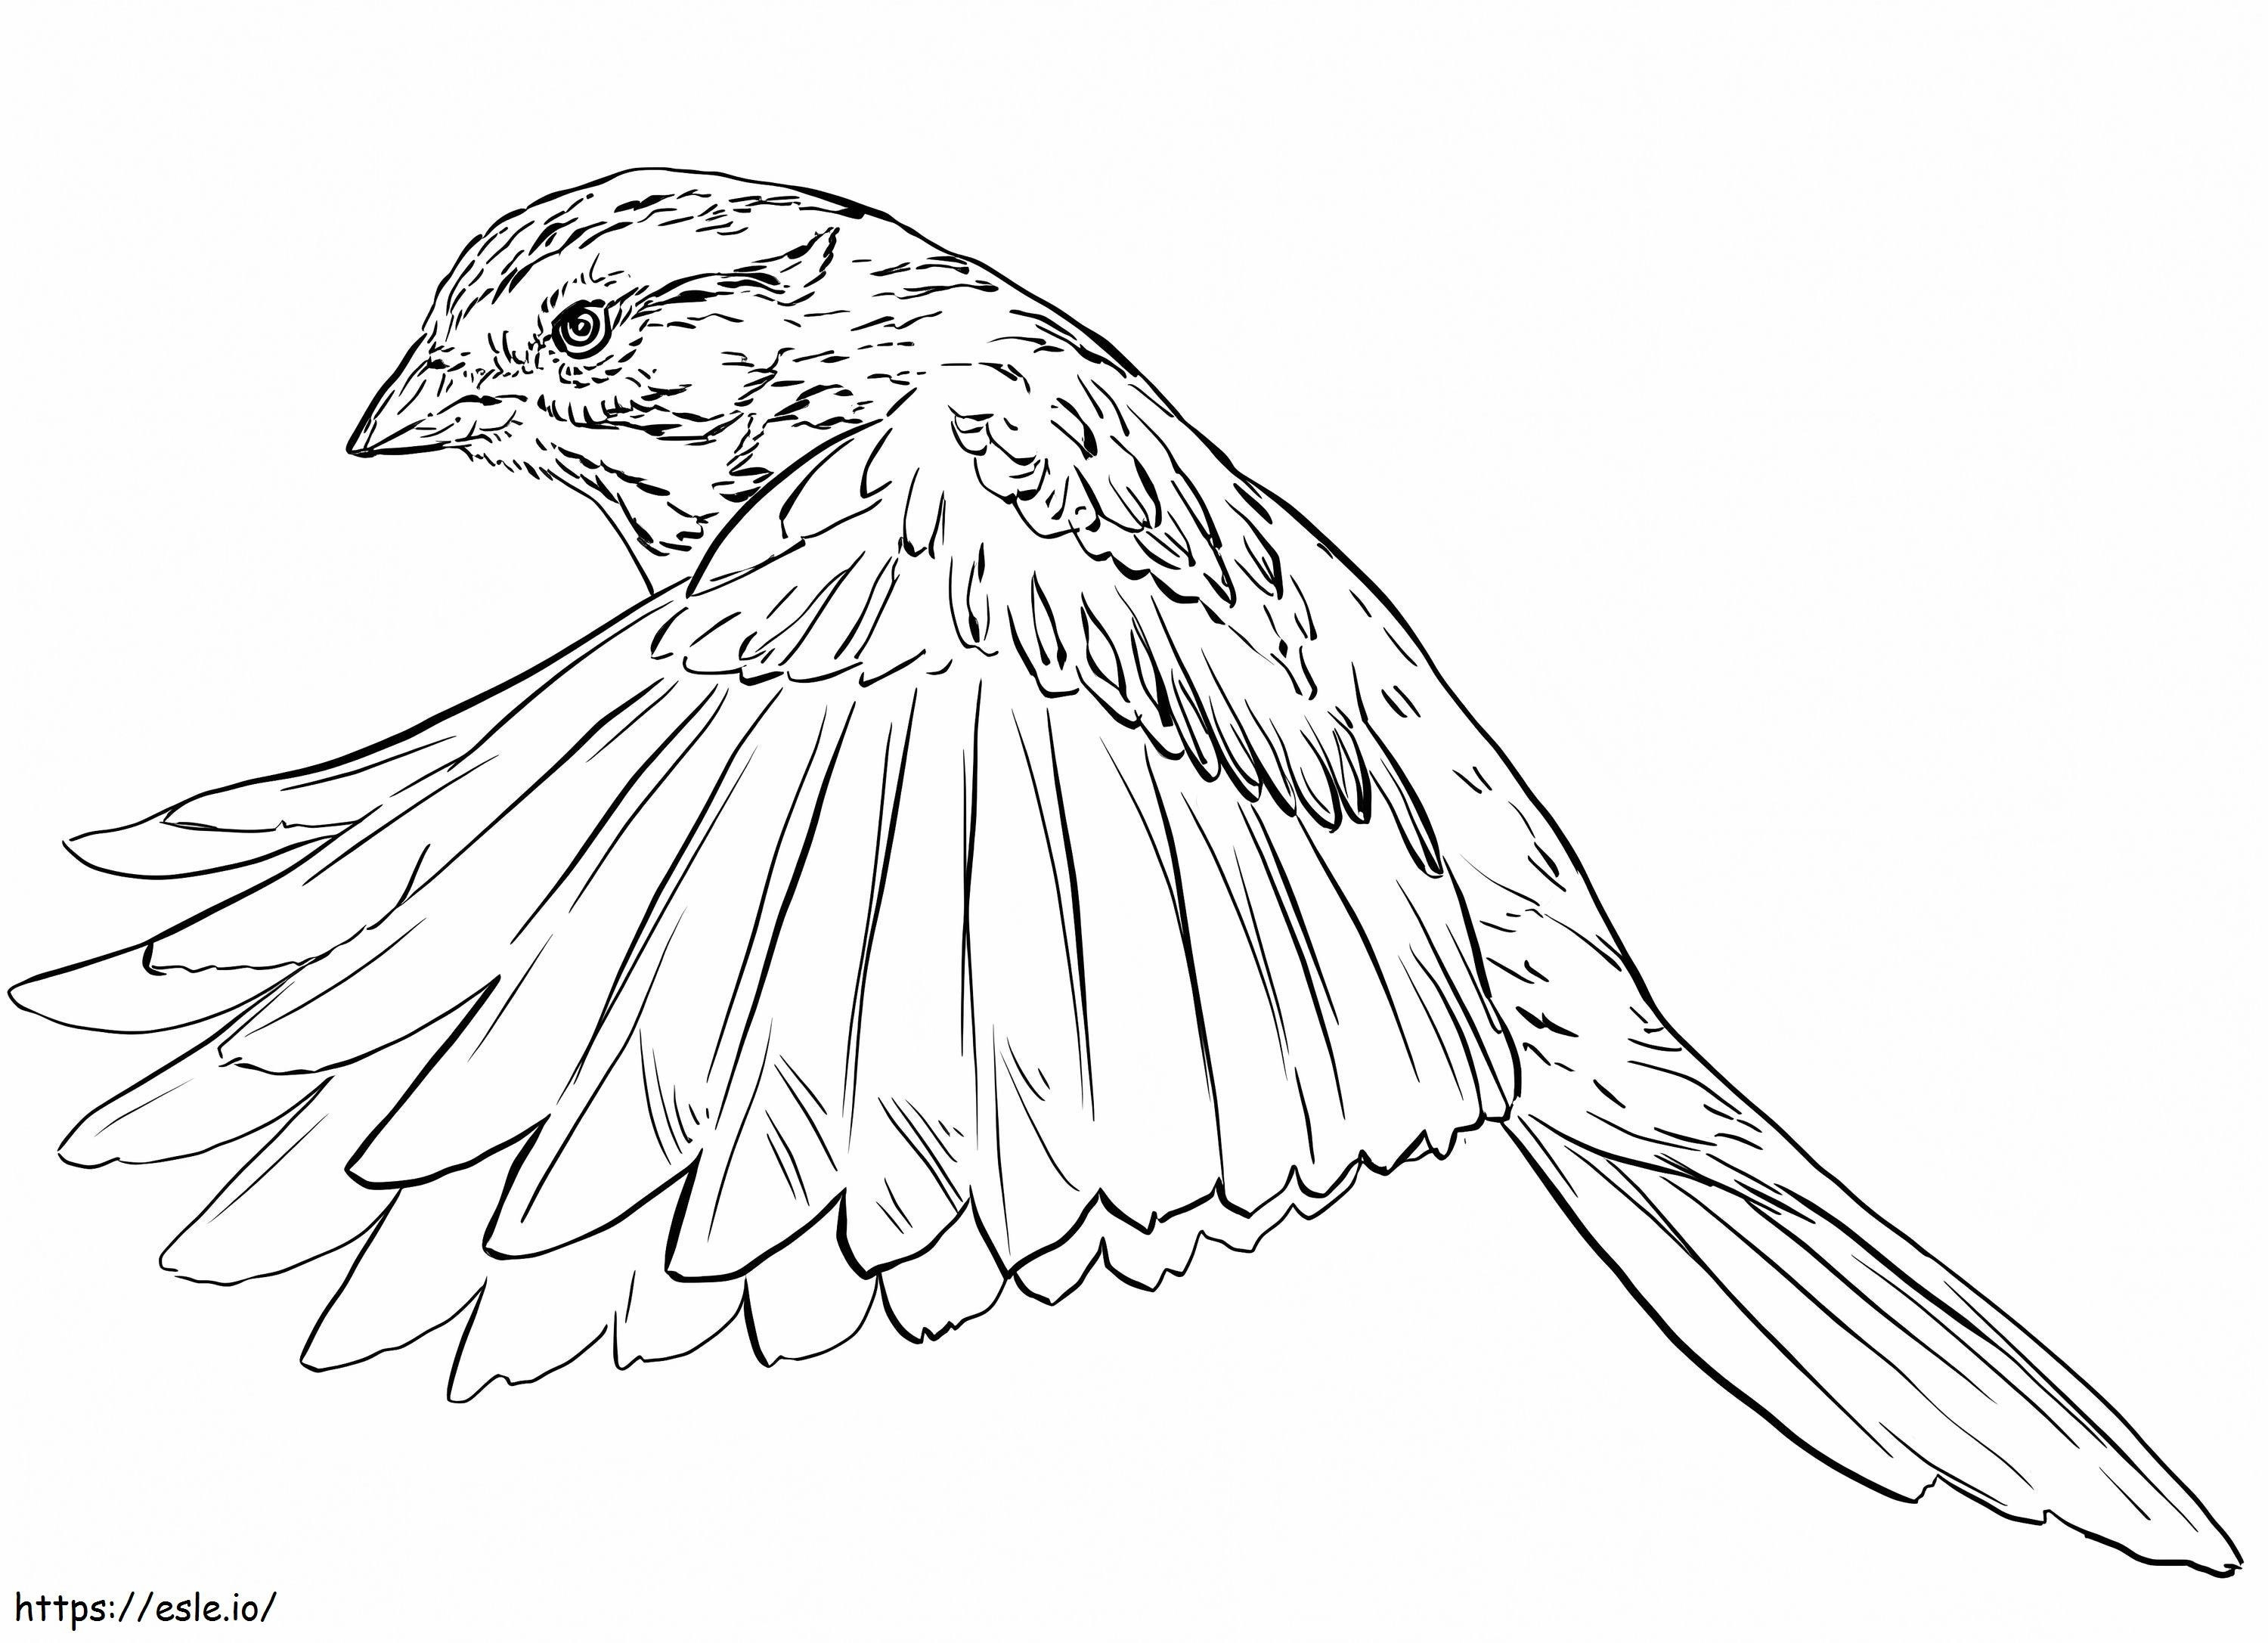 Sparrow Flapping Wings coloring page